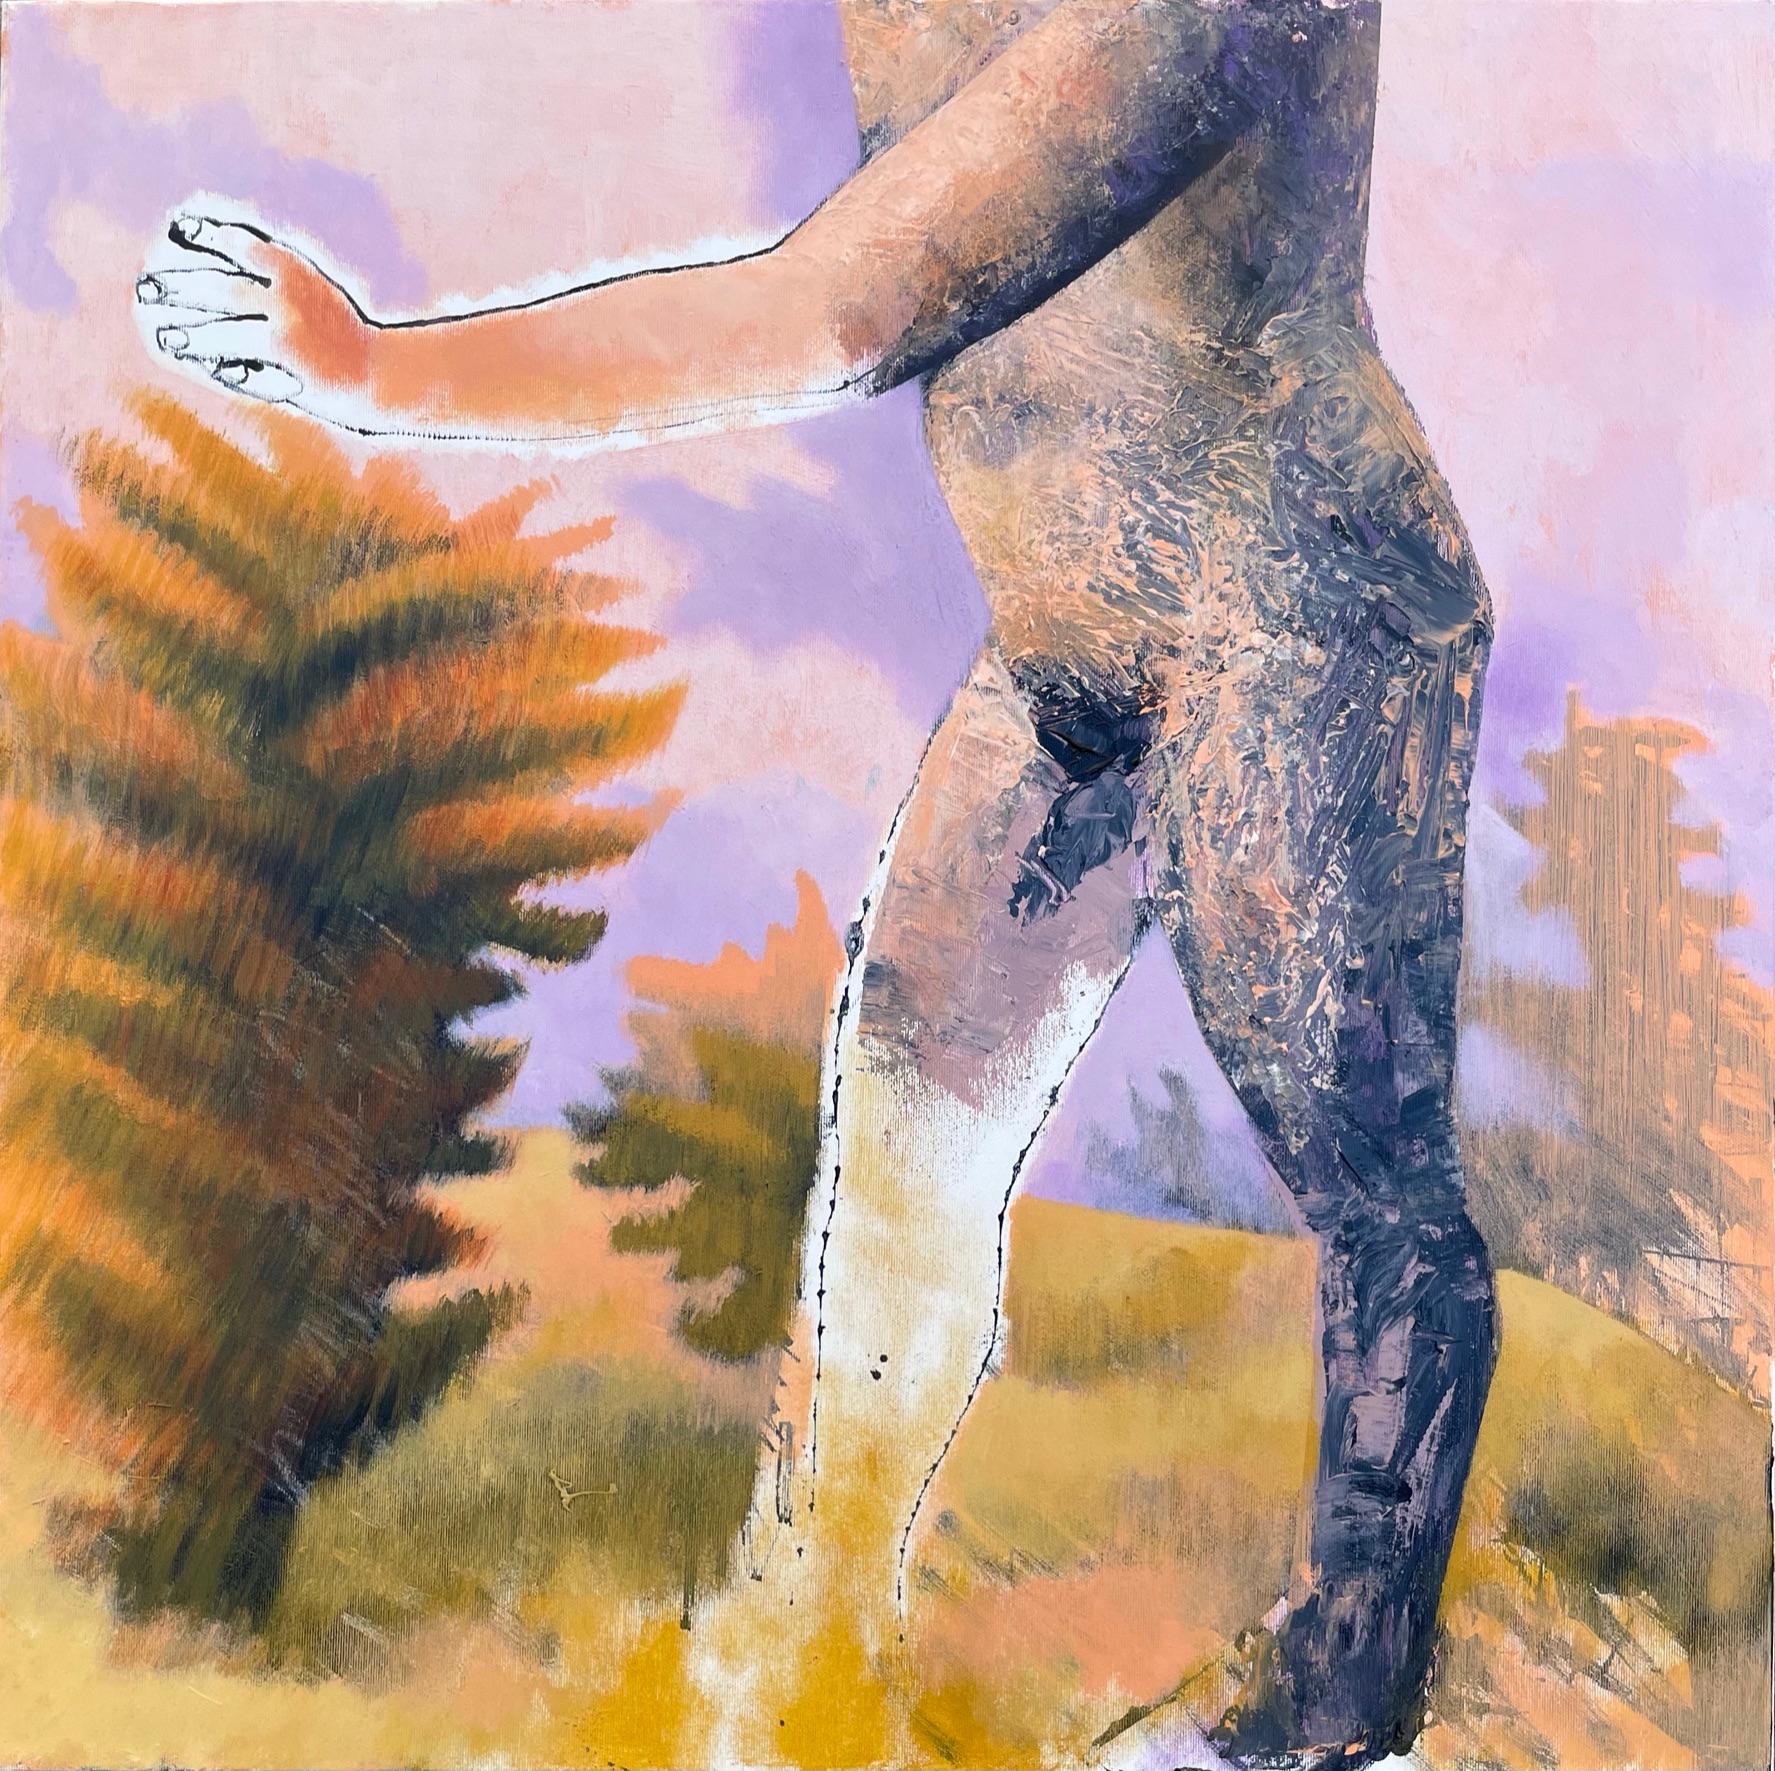 Figure Walking in a Dry Landscape - 21st Century, Male, Nude, Nature, Summer